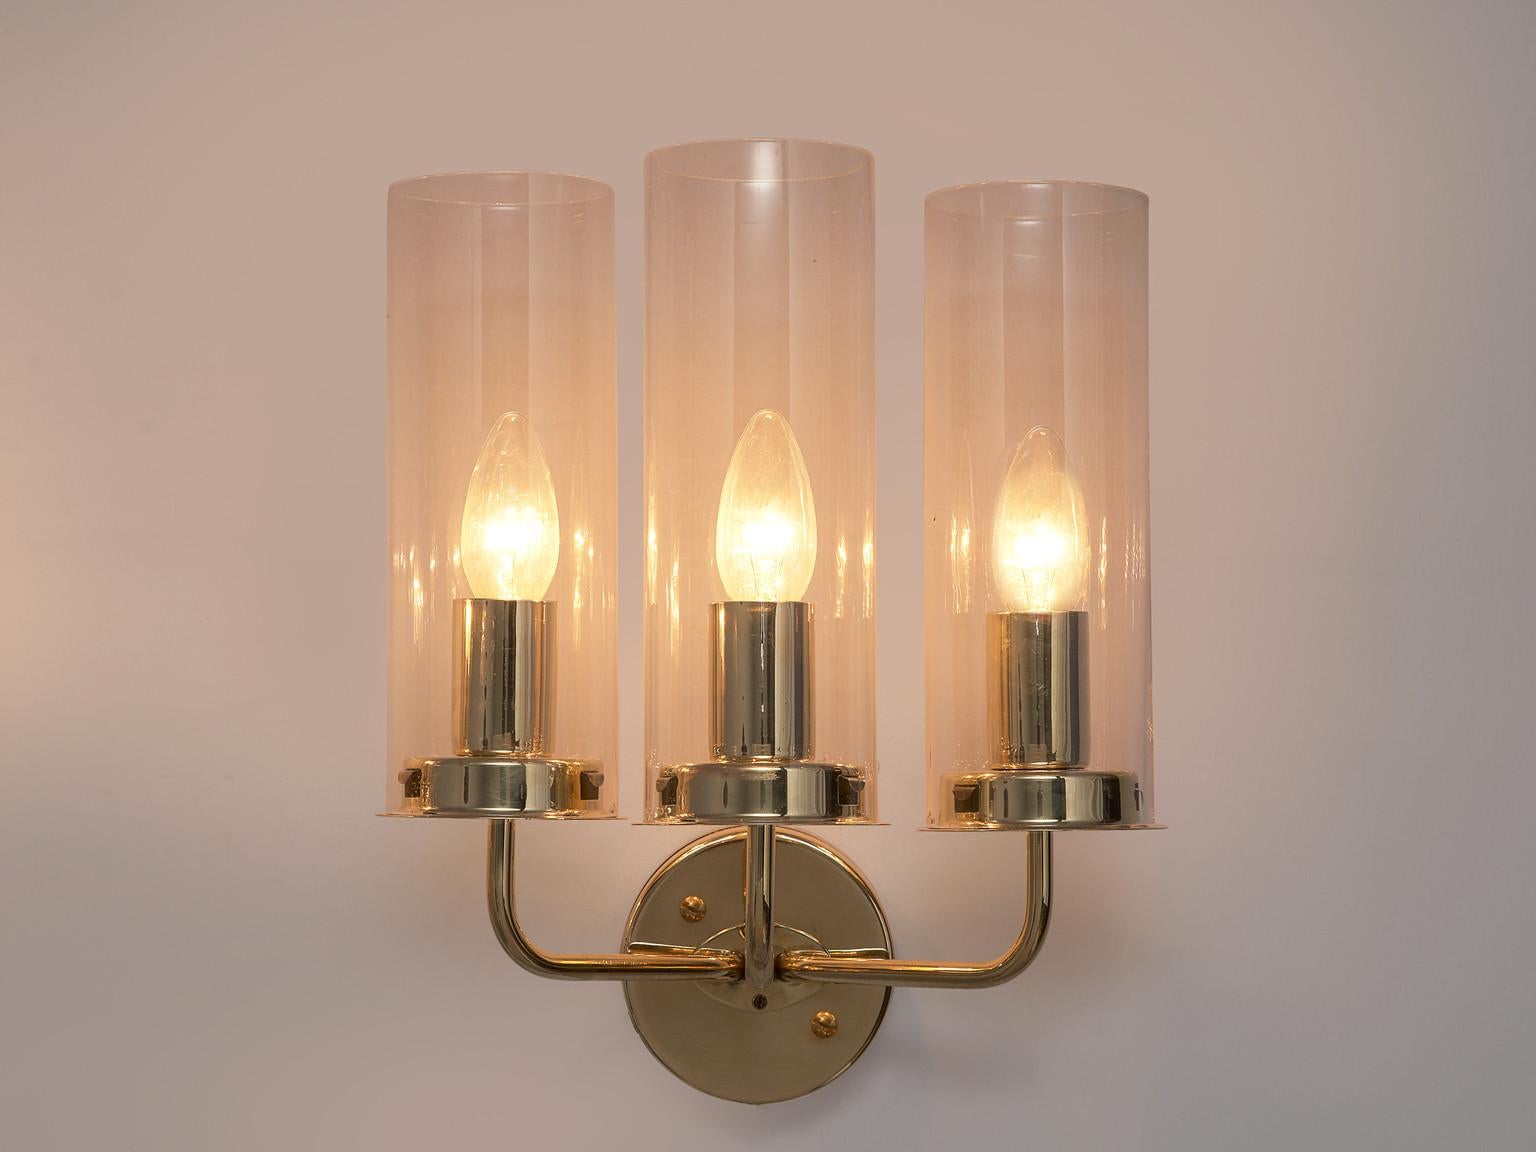 Hans-Agne Jakobsson for Hans-Agne Jakobsson AB in Markaryd, 'Sonata' wall light, brass and glass, Sweden, 1960s

Elegant wall light designed by Swedish Master of Light; Hans Agne Jakobsson. This classic lamp features a round fixture with three arms